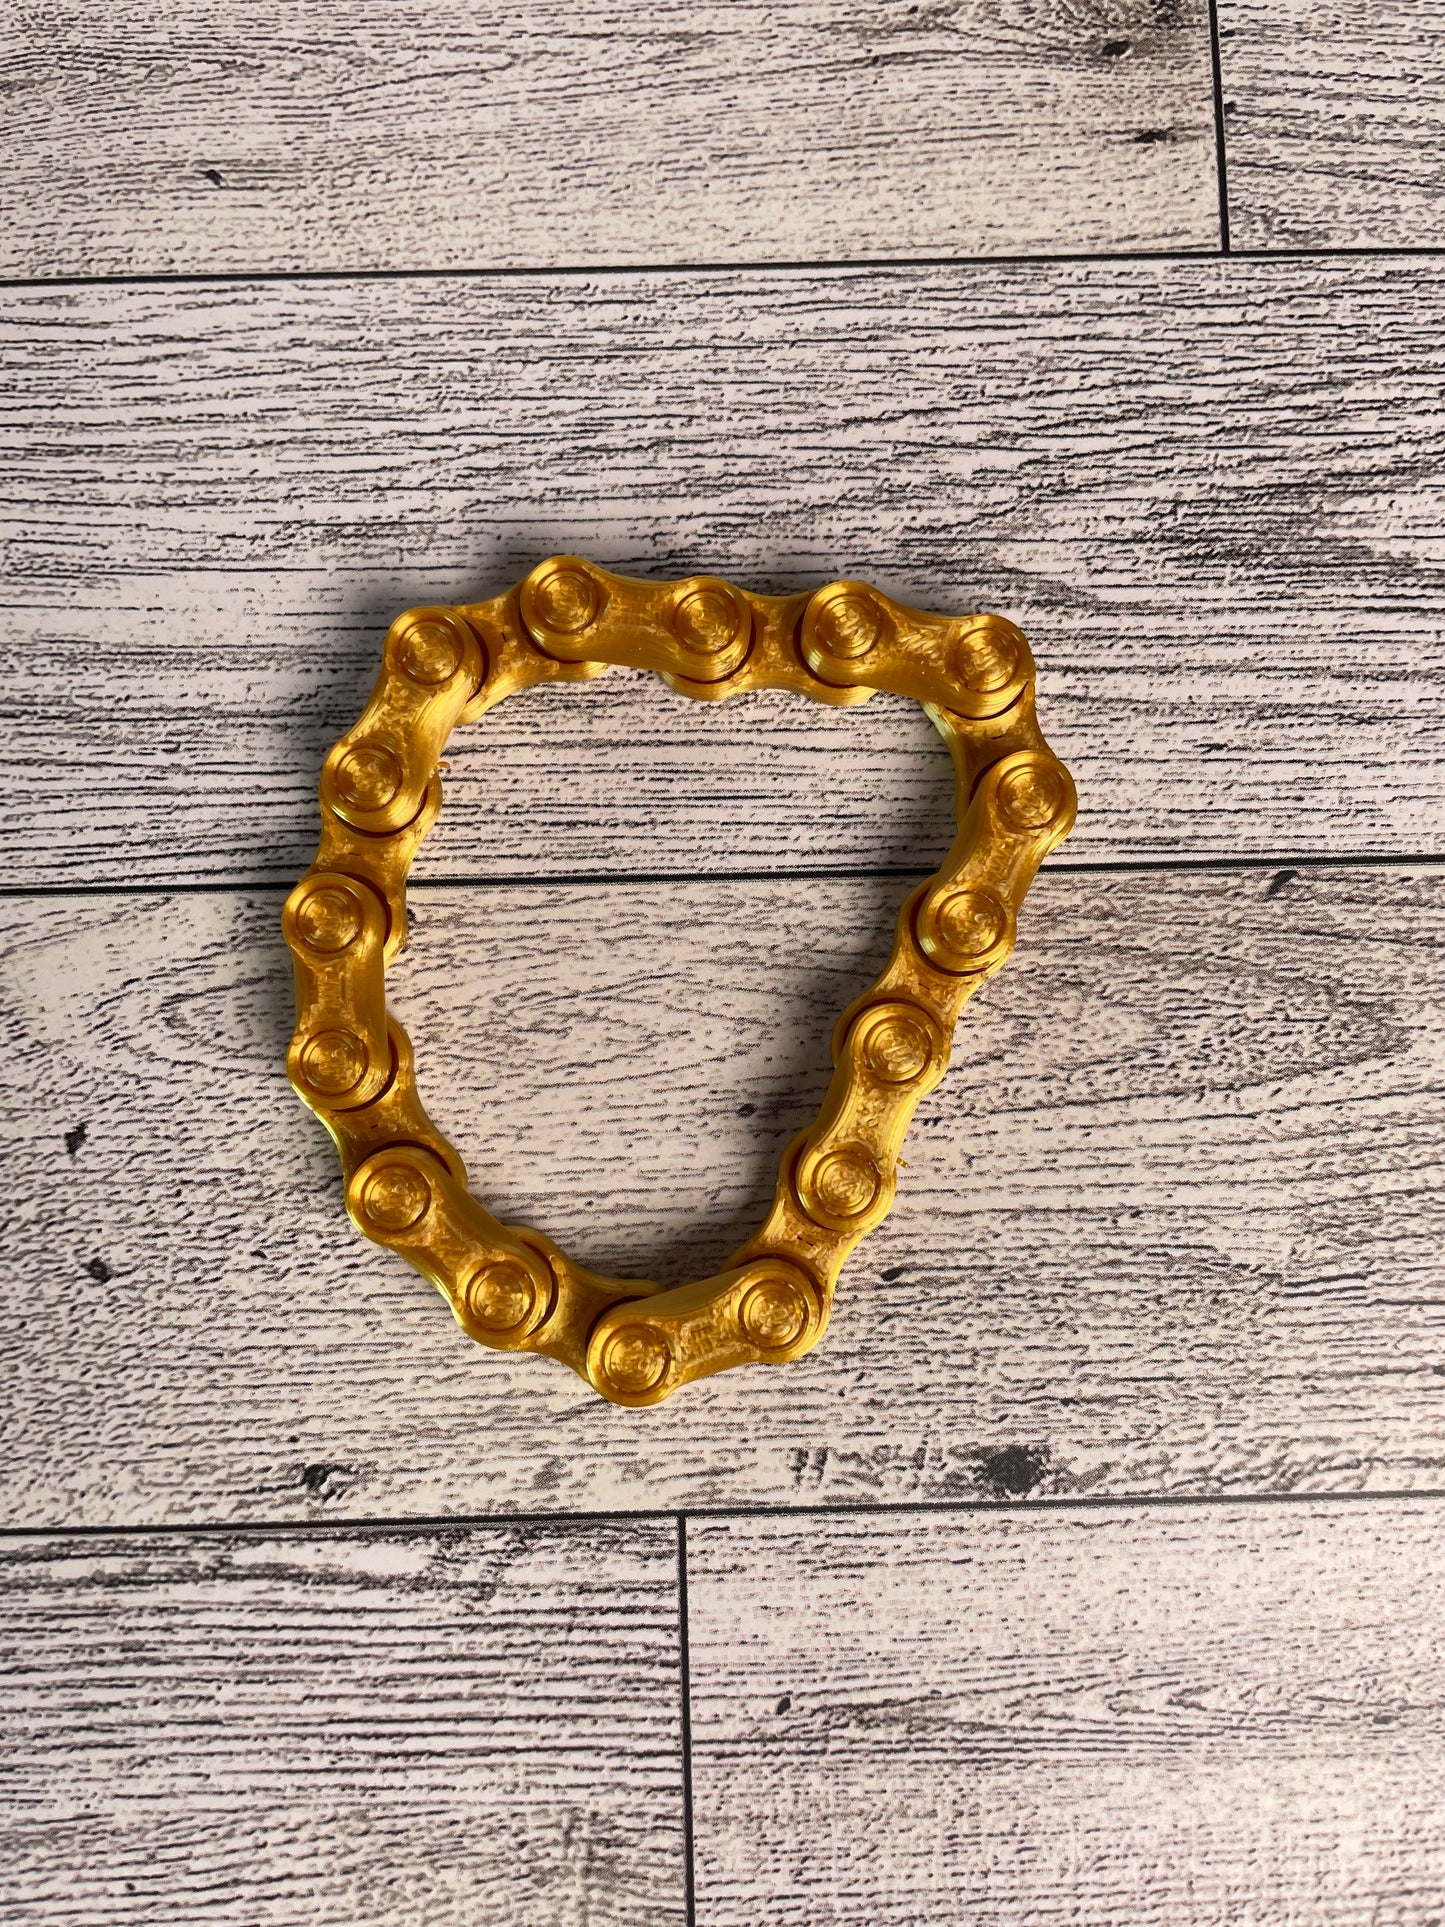 A gold chain link on a wood backdrop. The chain is arranged in a circle shape and there are eight links.